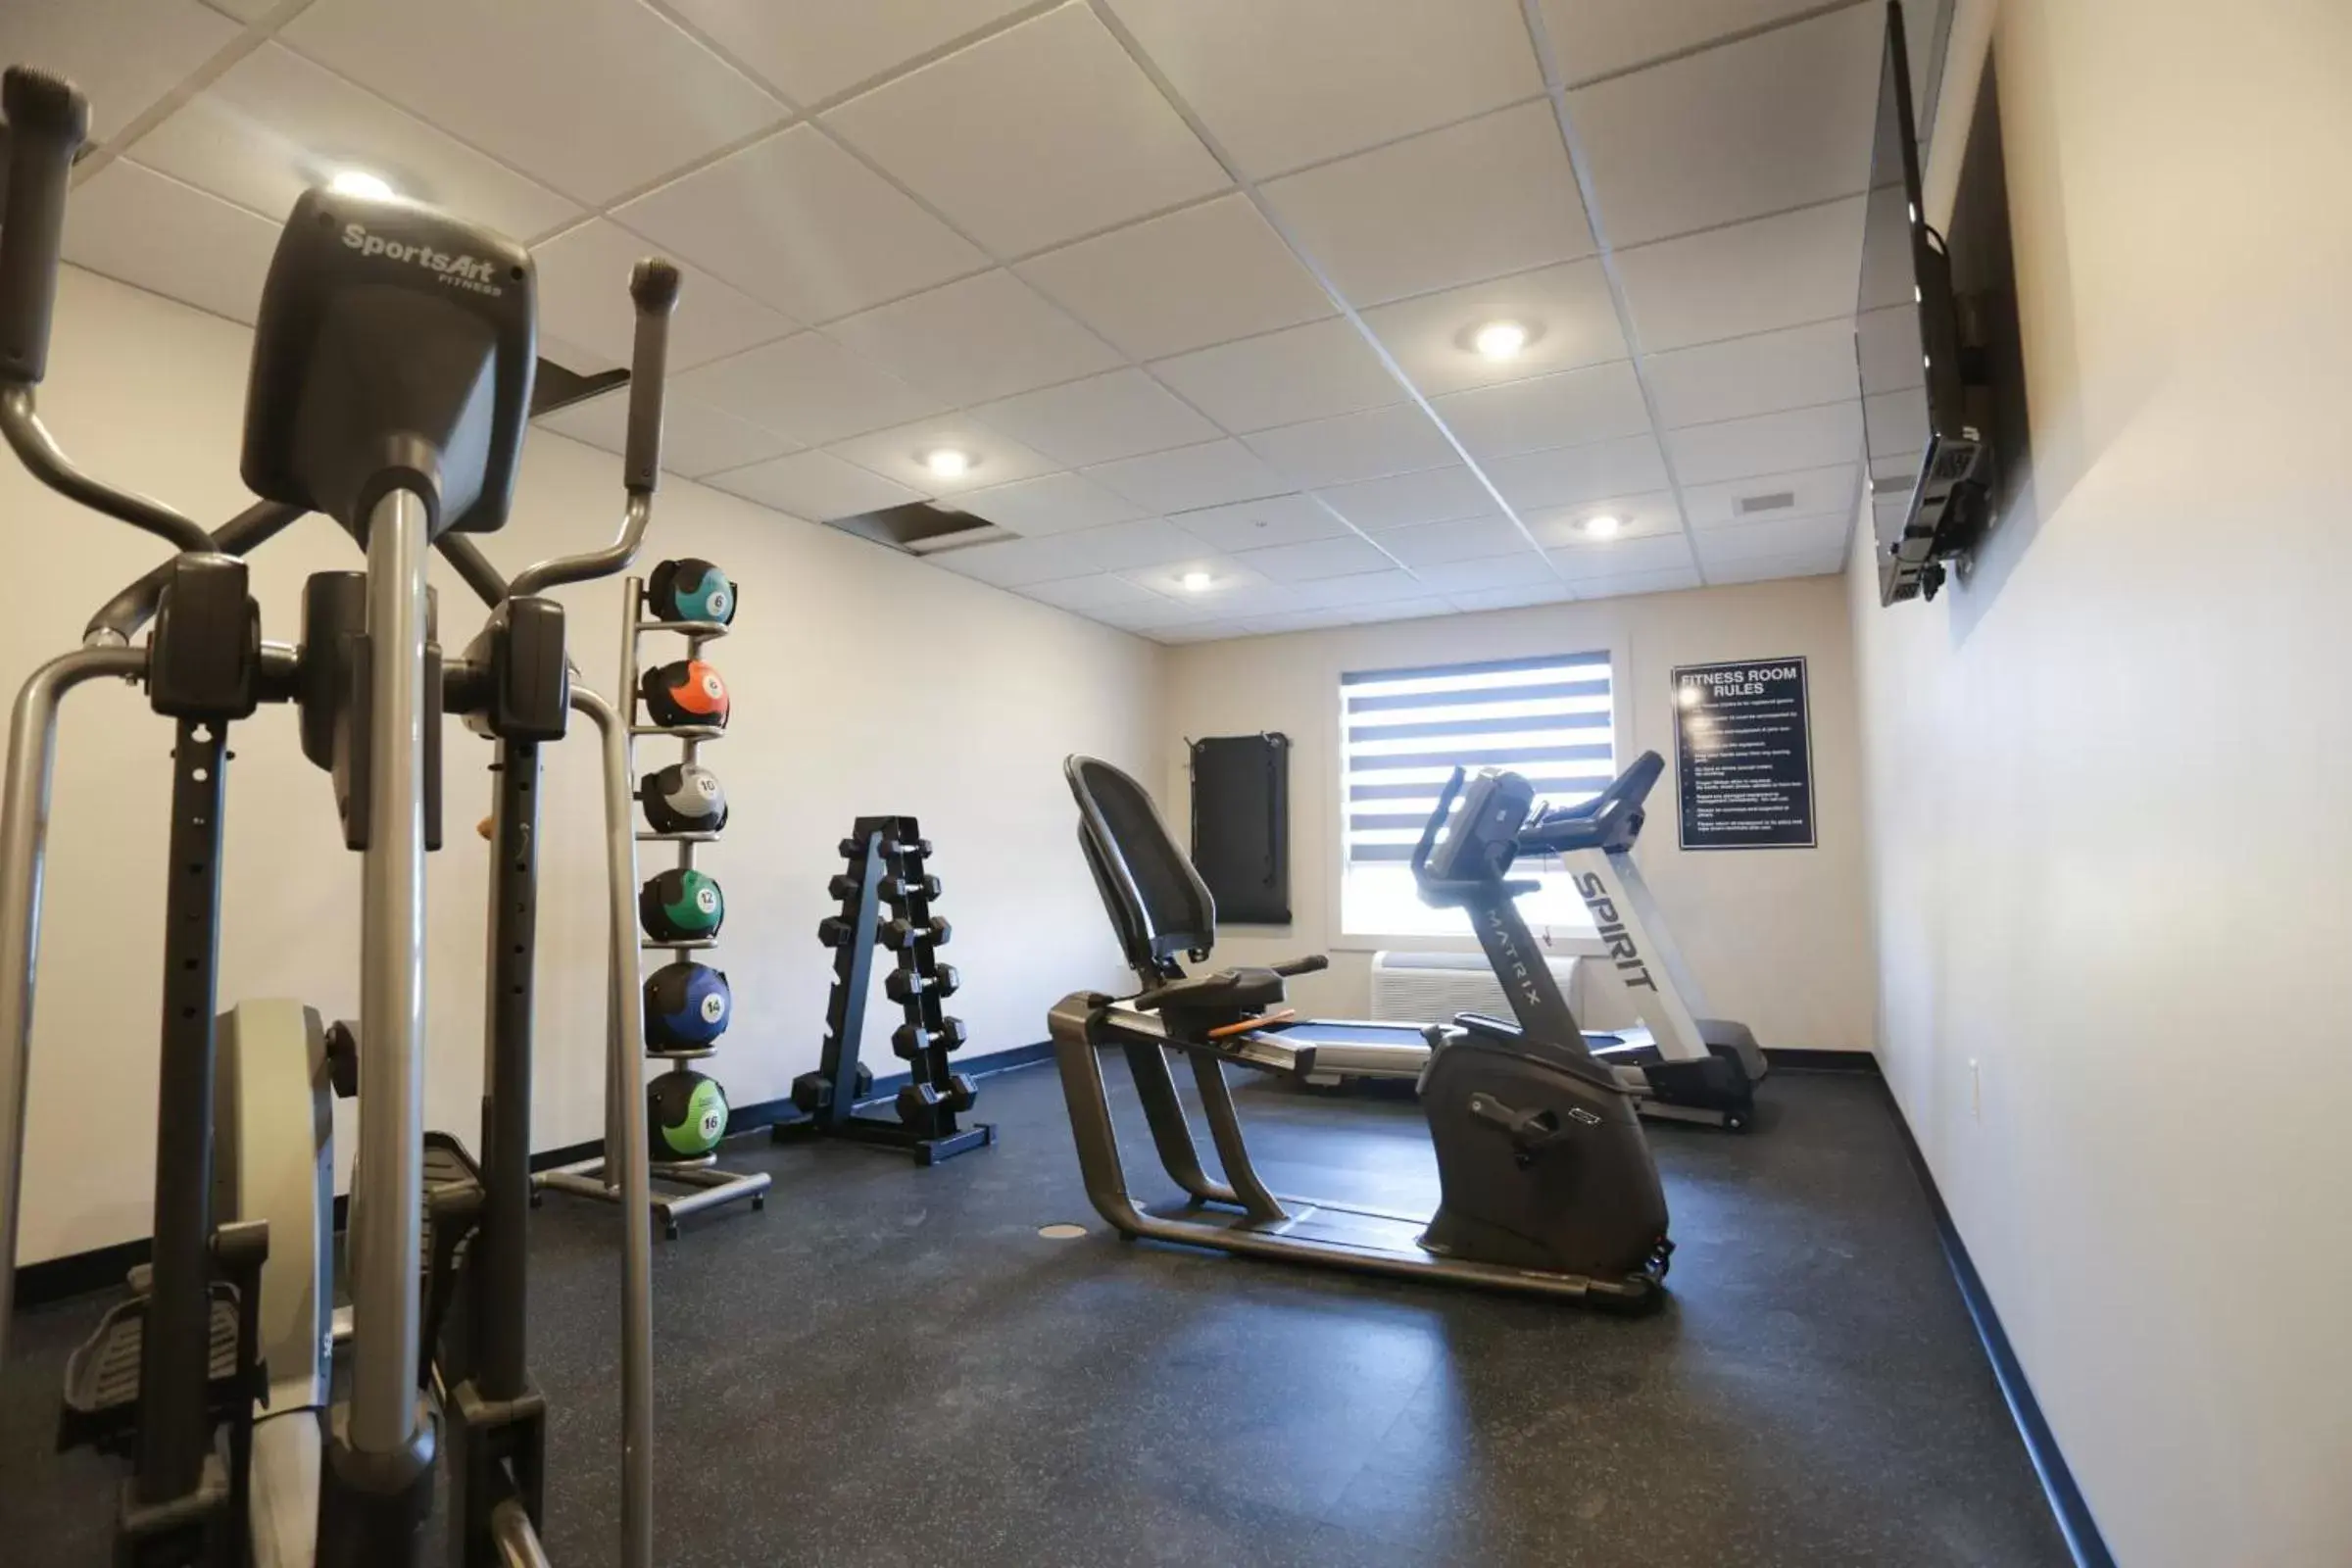 Fitness centre/facilities, Fitness Center/Facilities in Days Inn by Wyndham Calgary North Balzac